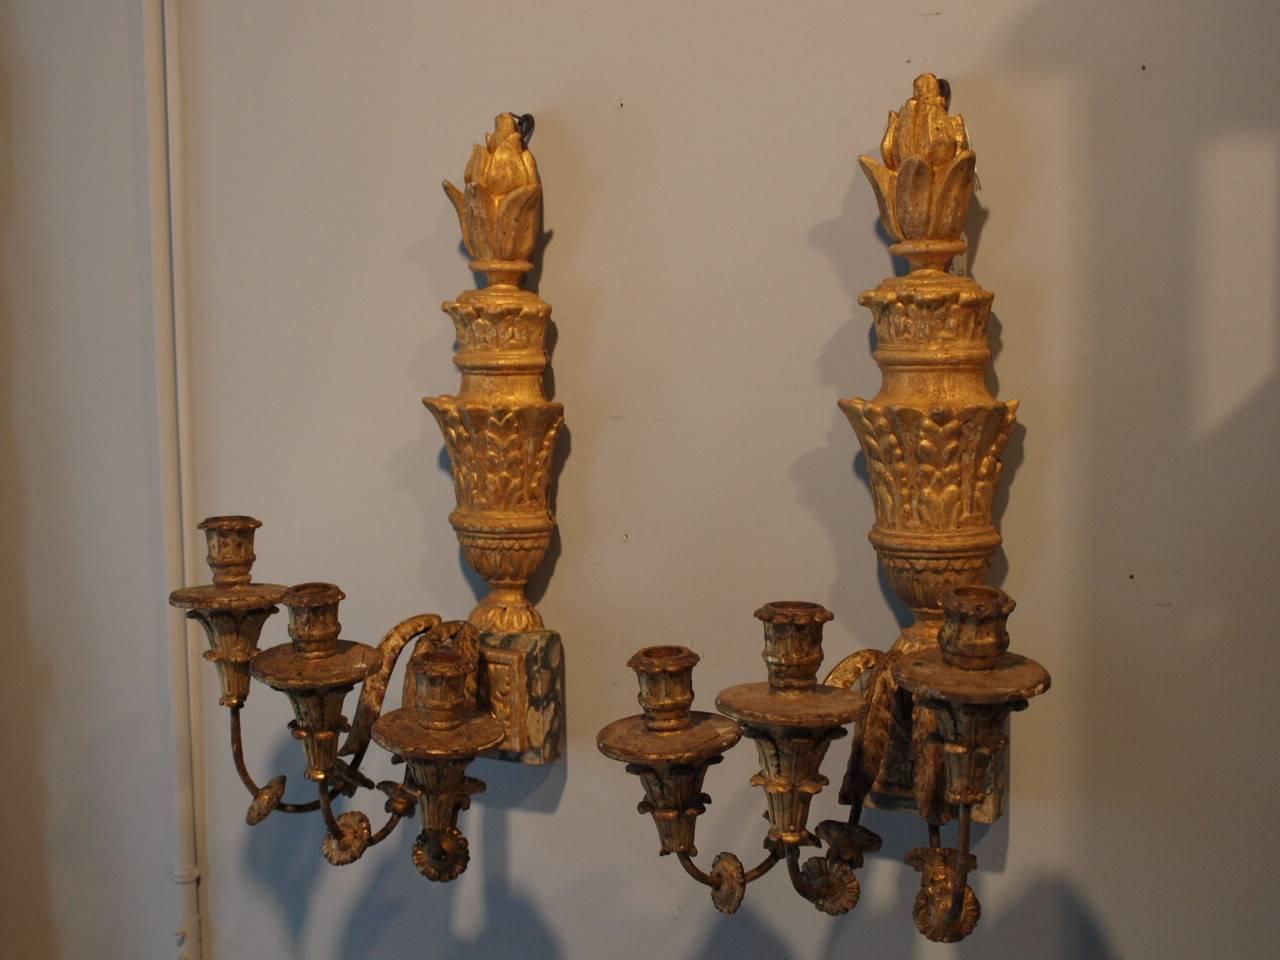 A very striking pair of 18th century Northern Italian 3 arm sconces / appliques.  Beautifully constructed in polychromed and giltwood with tapering iron arms.  Faux Marble detailing.